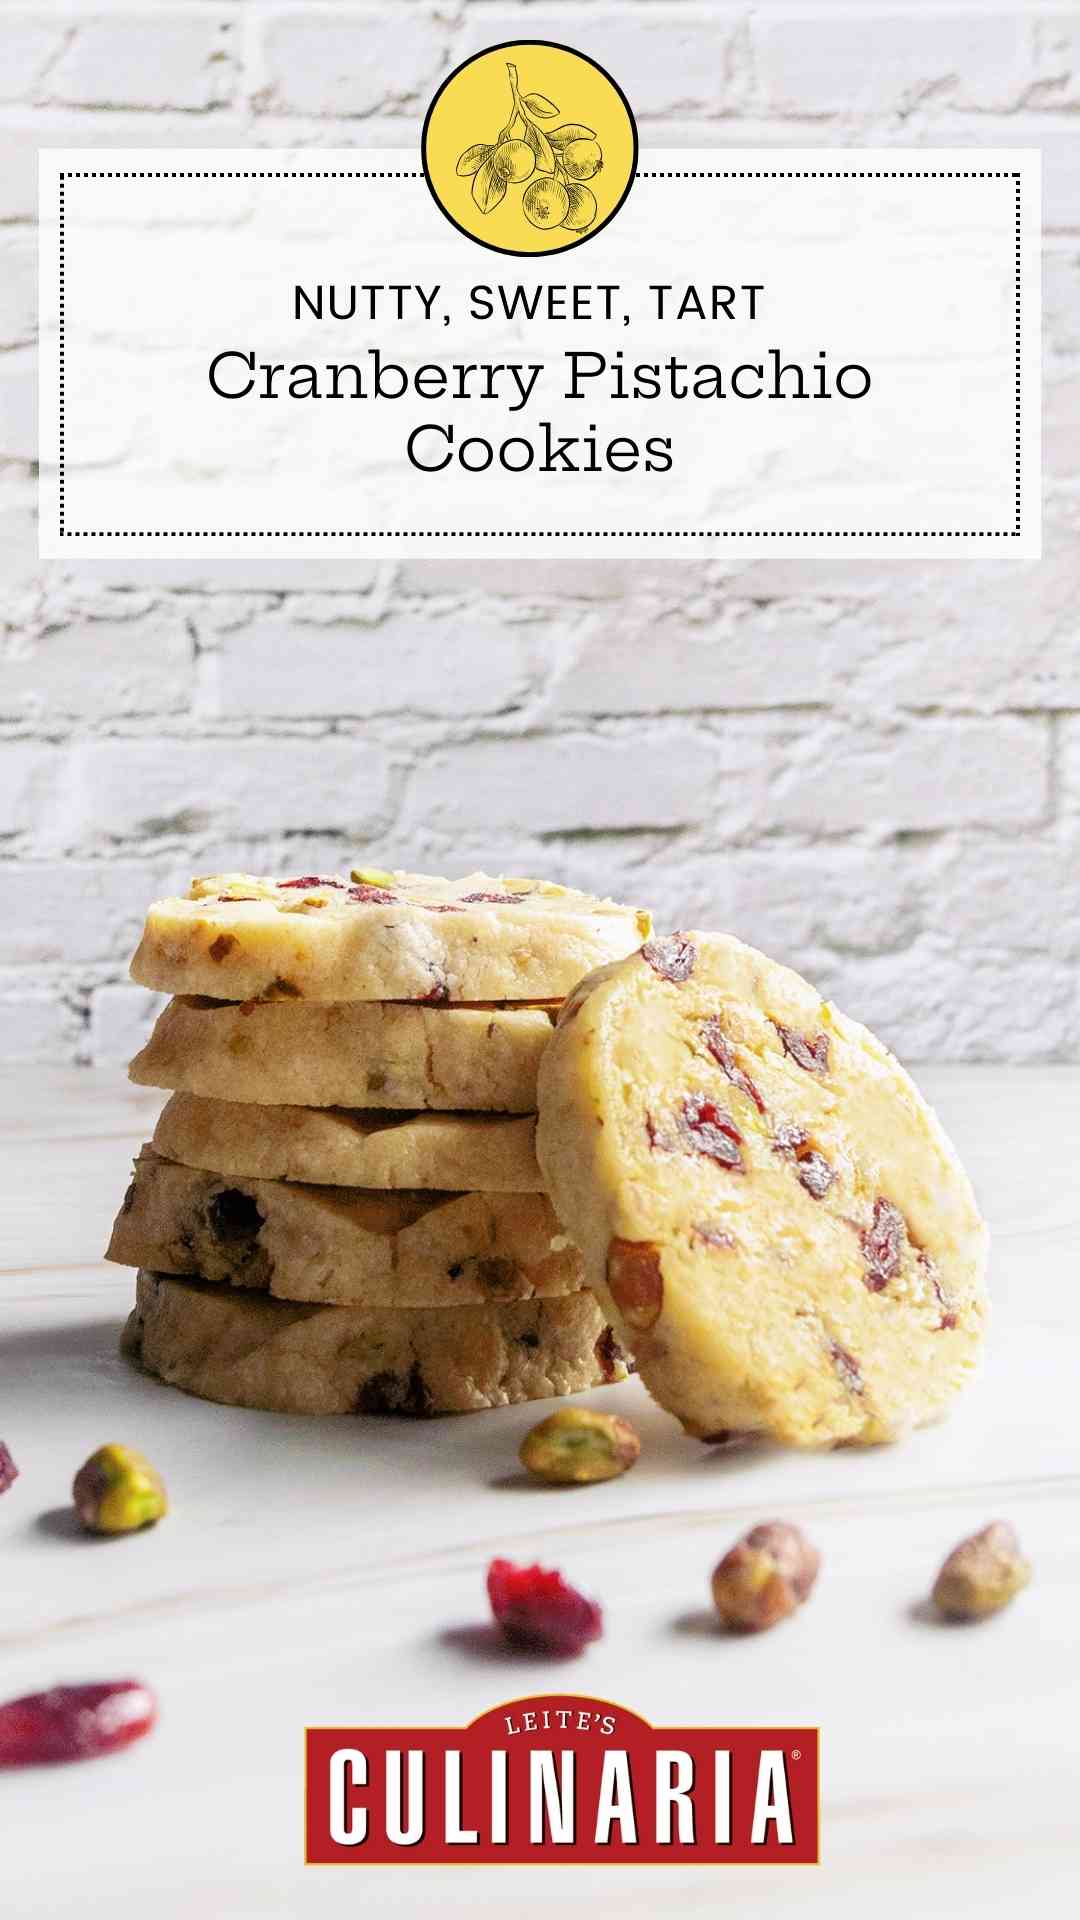 Five stacked cranberry pistachio cookies with another cookie leaning against the stack.